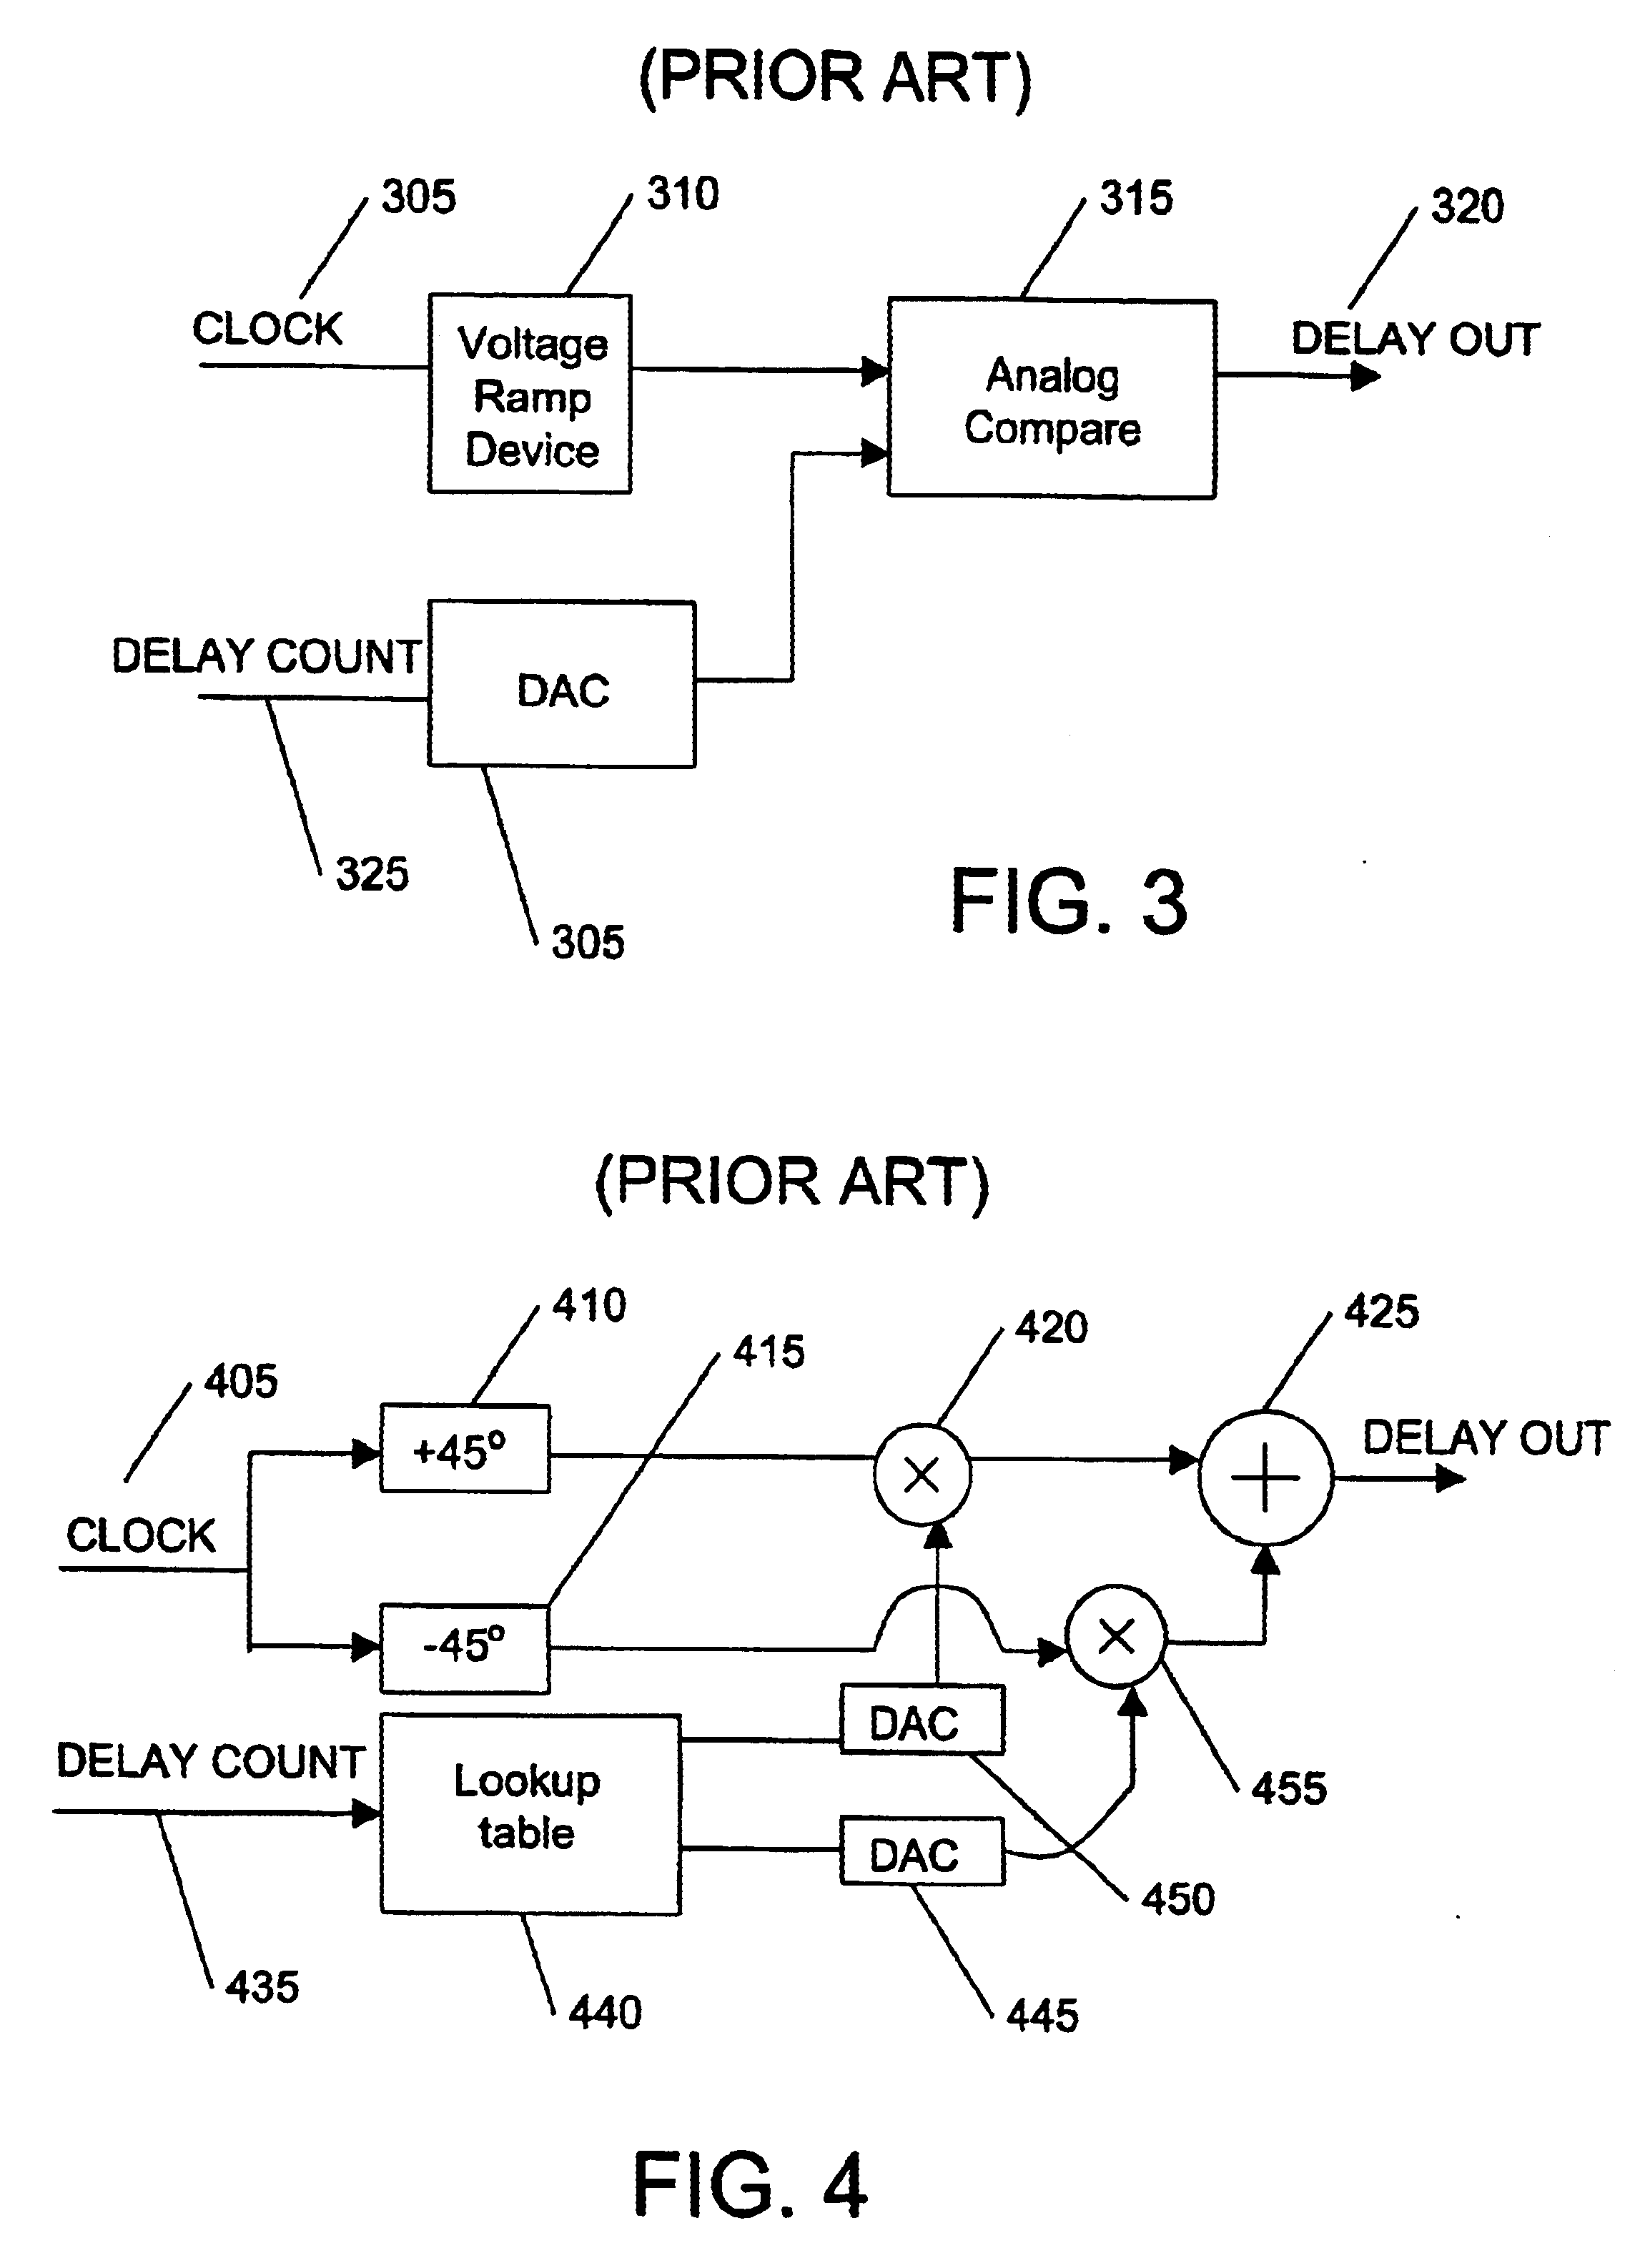 Method and apparatus for implementing precision time delays